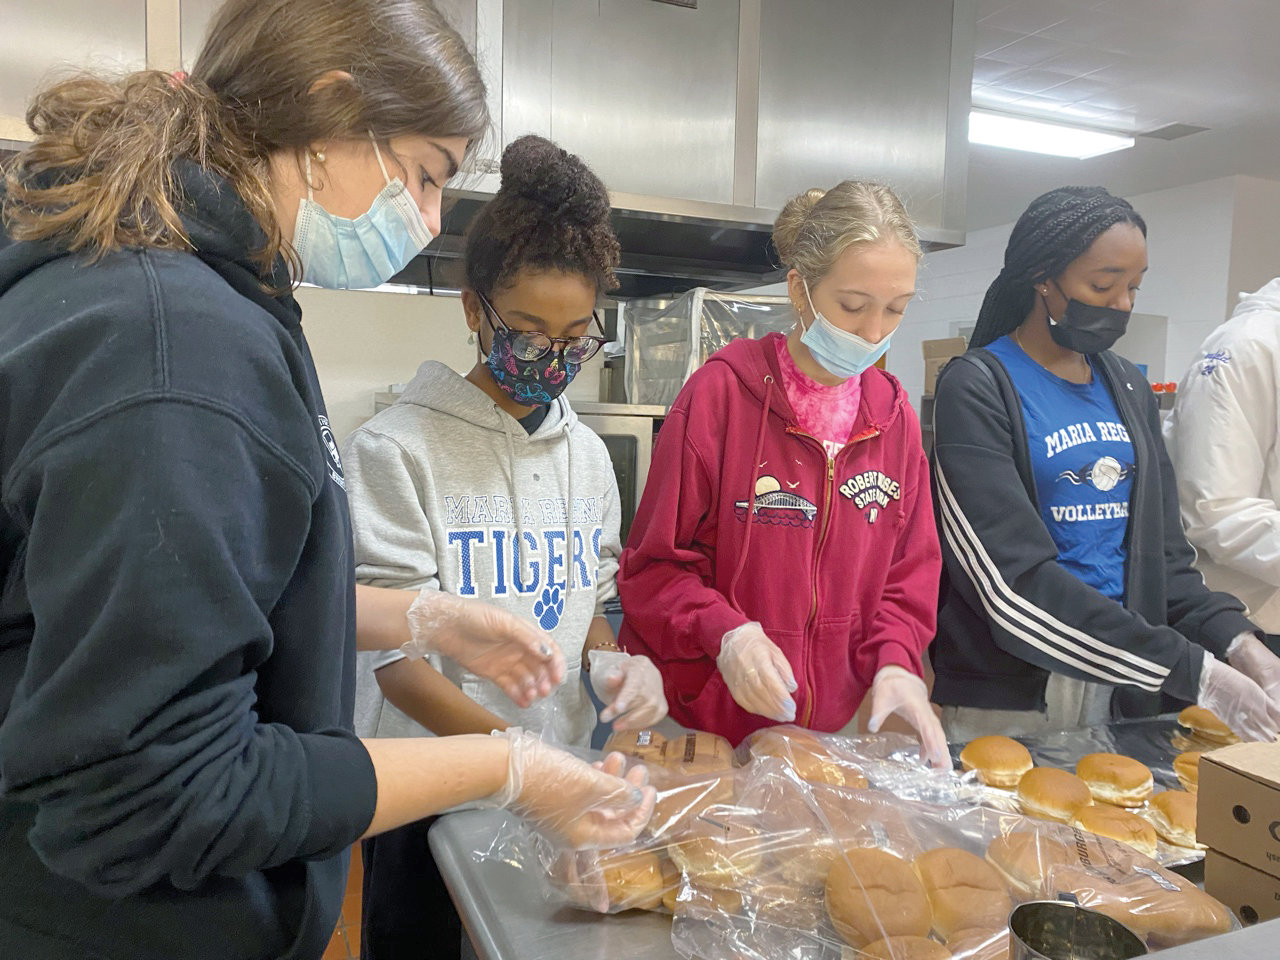 Four CRS Club members of Maria Regina High School in Hartsdale are shown preparing meals in the kitchen of the high school dining hall which were later distributed to the homeless in Manhattan as part of the school’s Breakfast Run program. They are, from left, Sophia Conroy, Jordyn Bryant, Hailey Manzo and Cyanna Shirley.